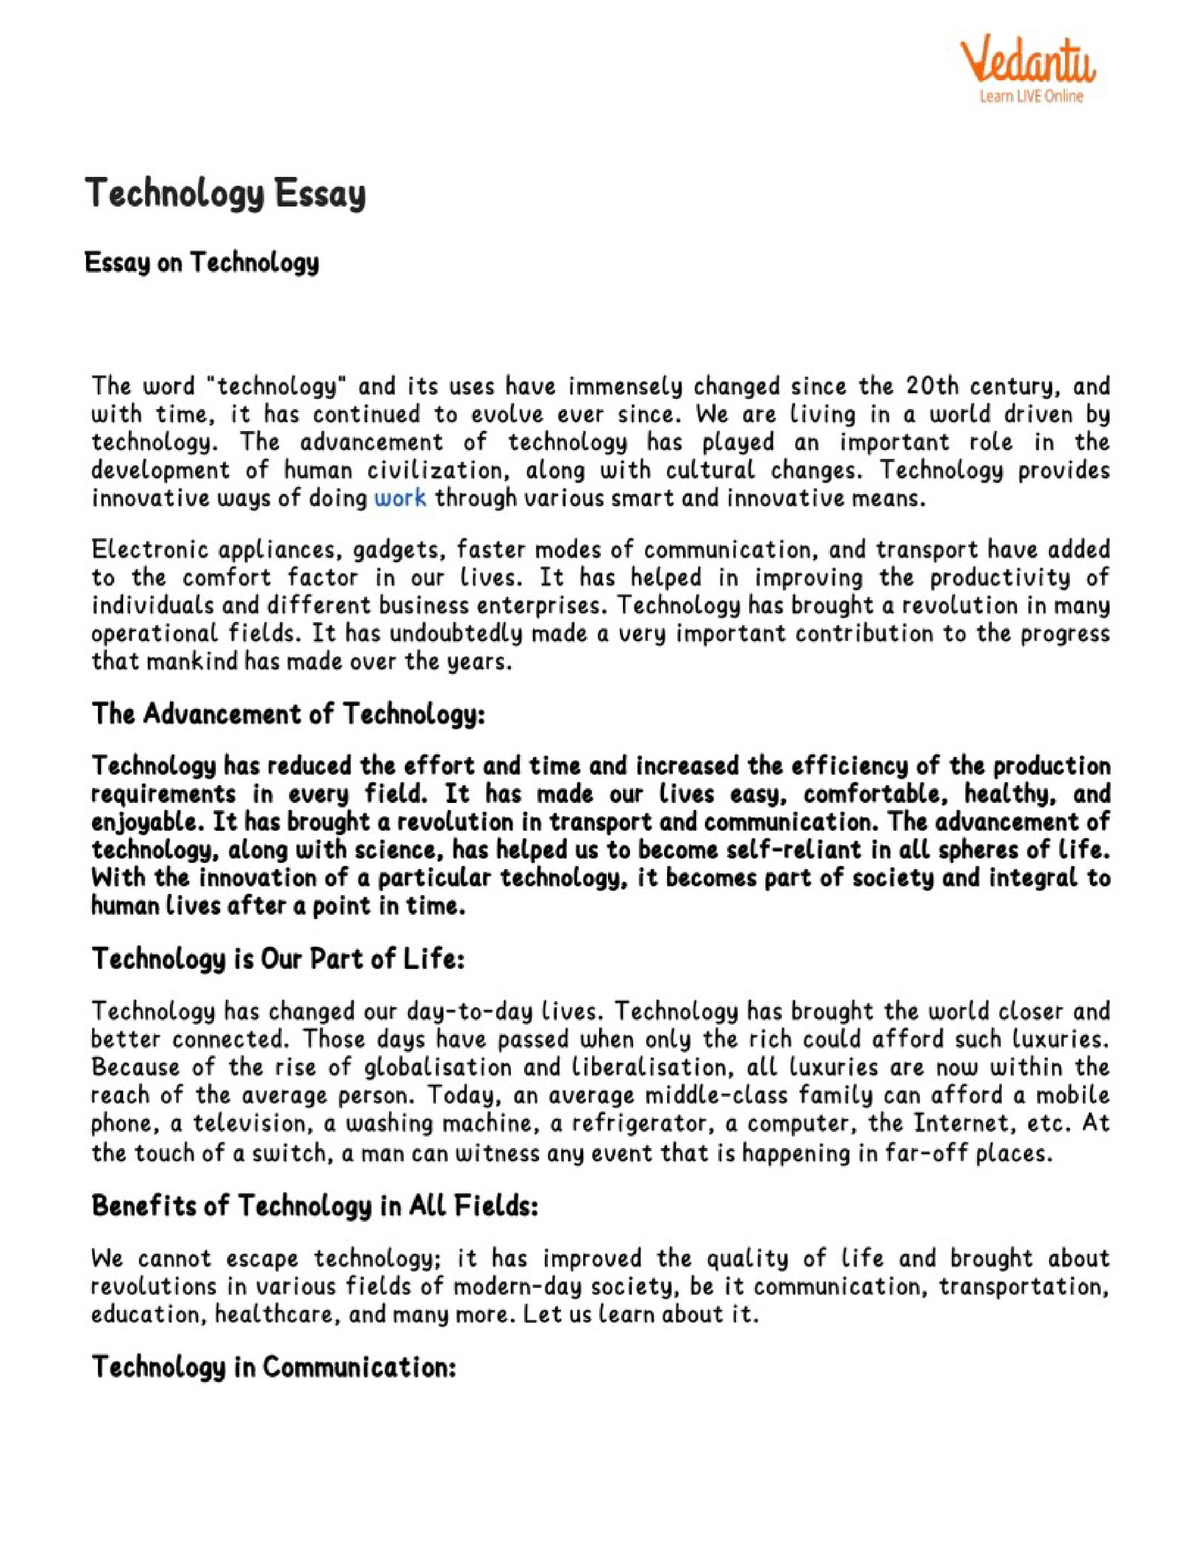 essay about advancement of technology